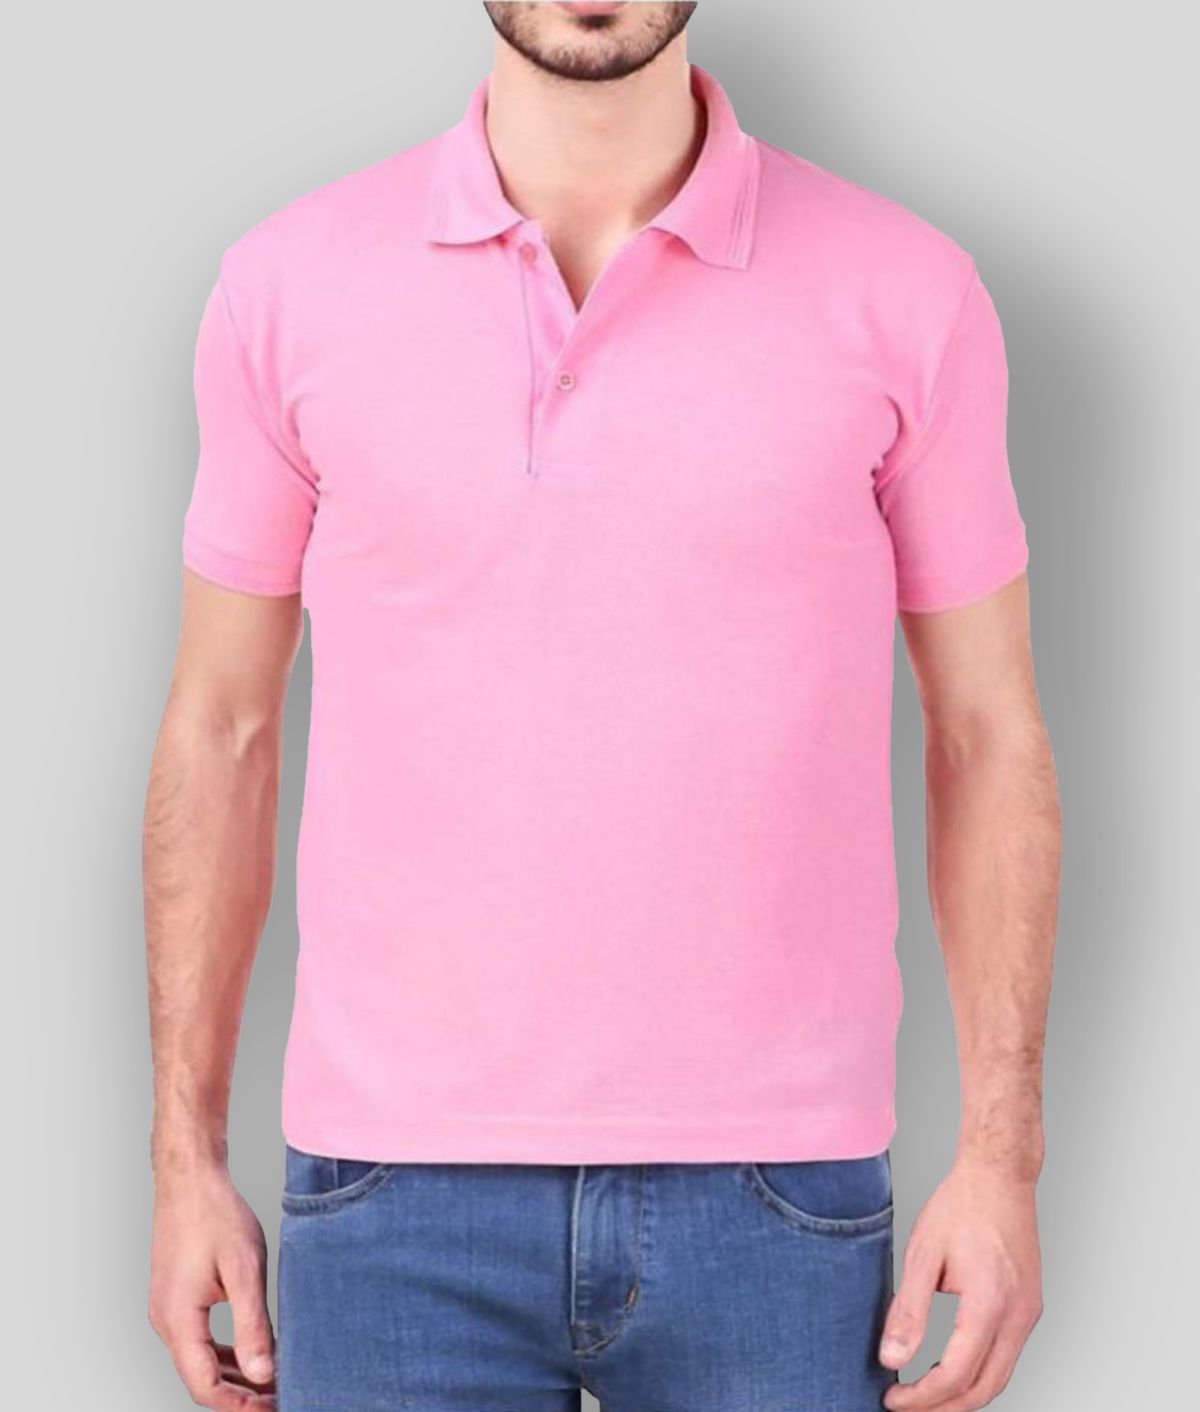     			SKYRISE - Pink Cotton Blend Slim Fit Men's Polo T Shirt ( Pack of 1 )